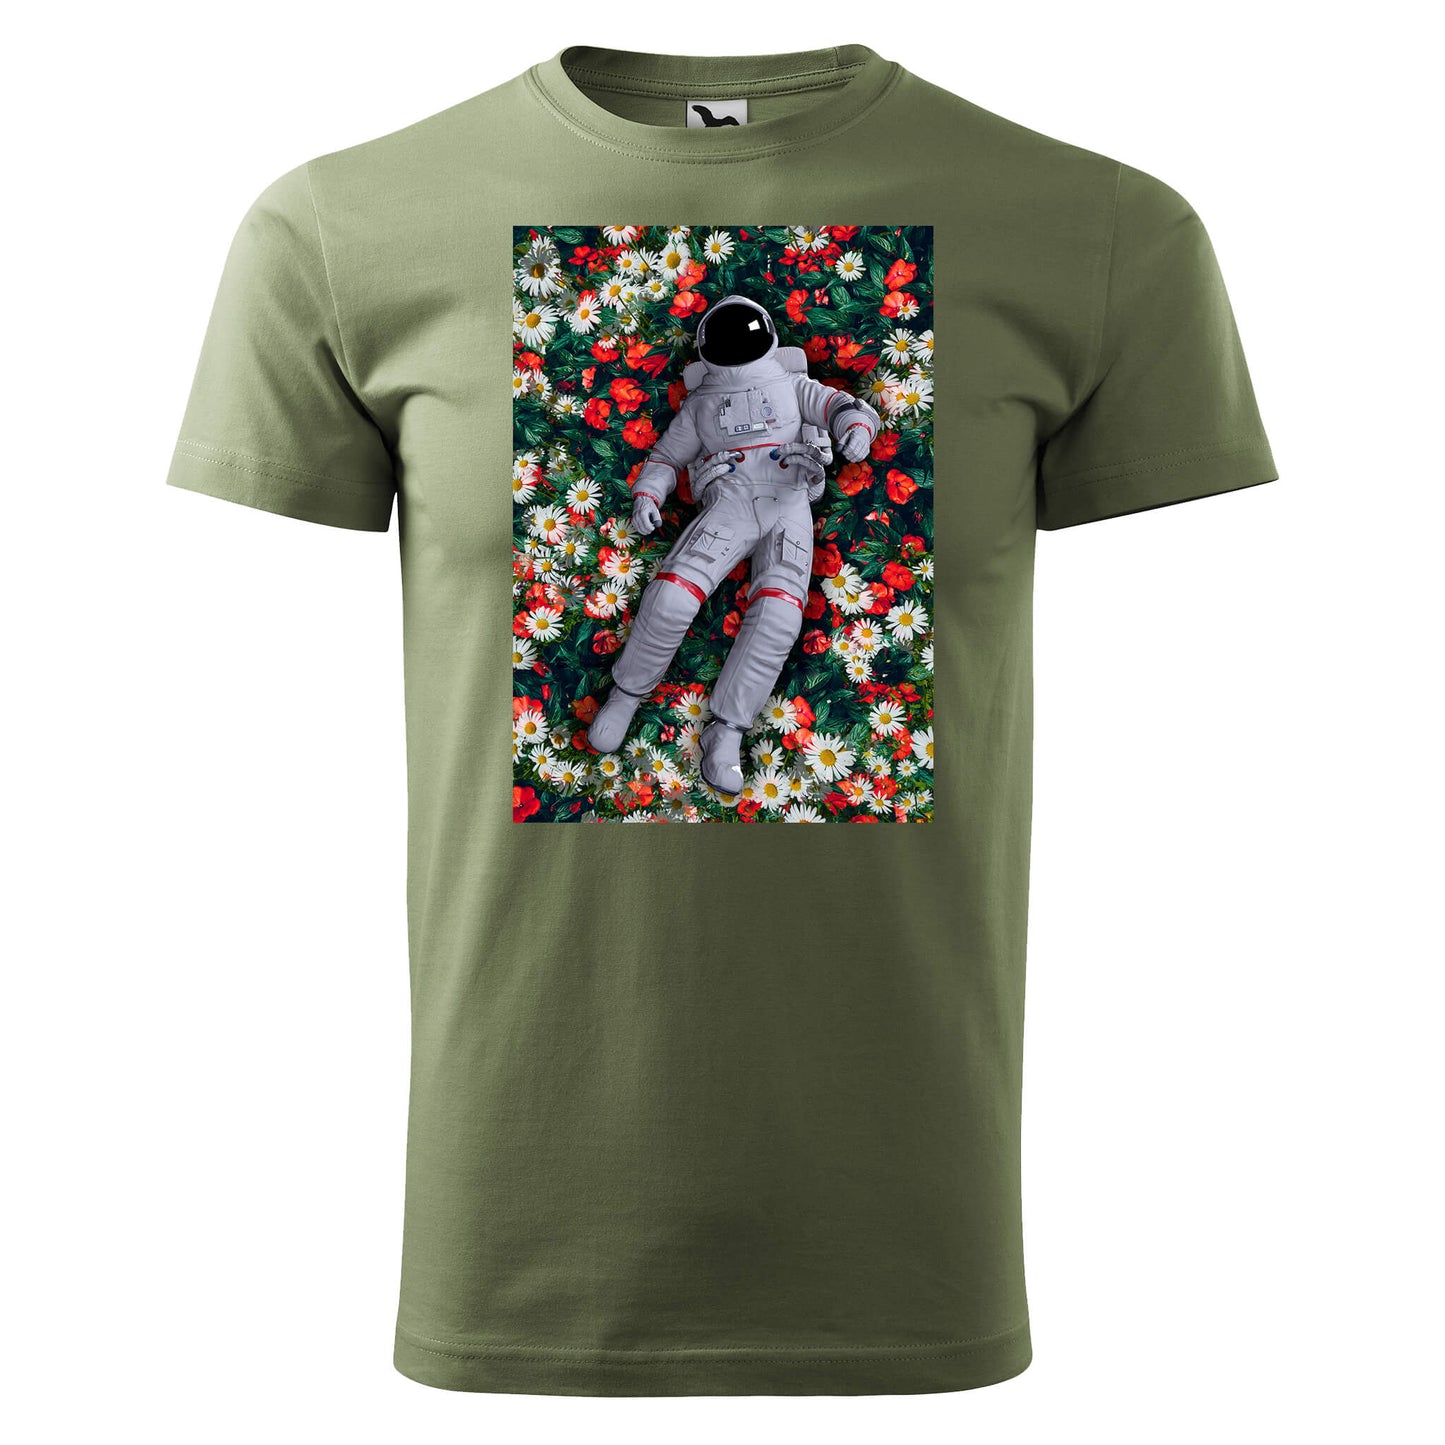 Astronaut laying in flowers t-shirt - rvdesignprint